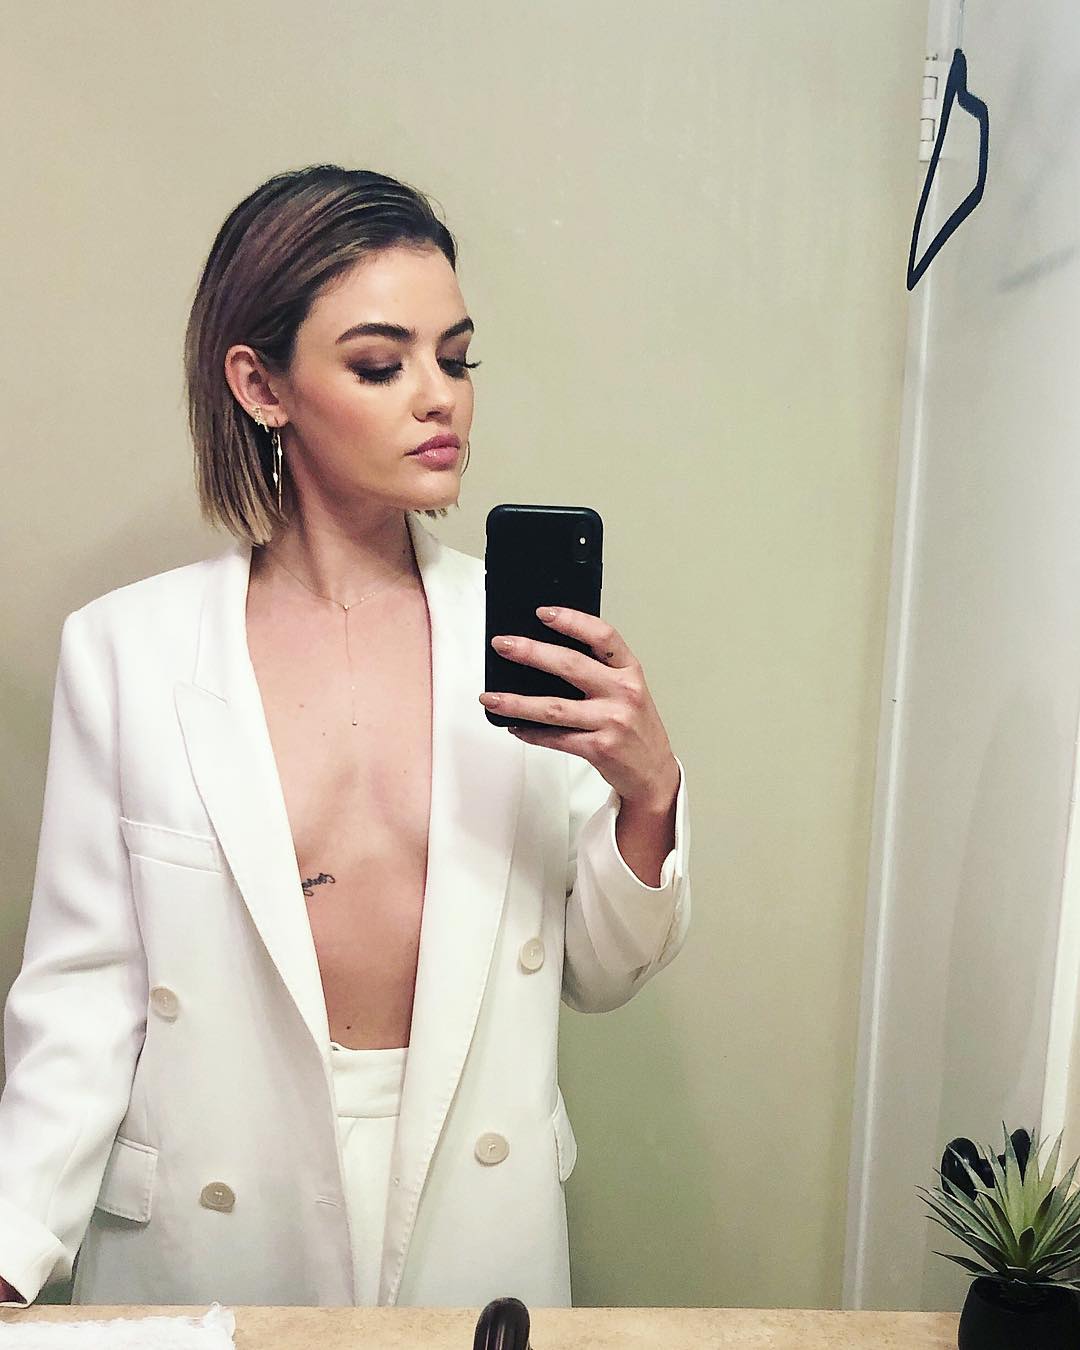 Topless pic hale lucy Lucy Hale